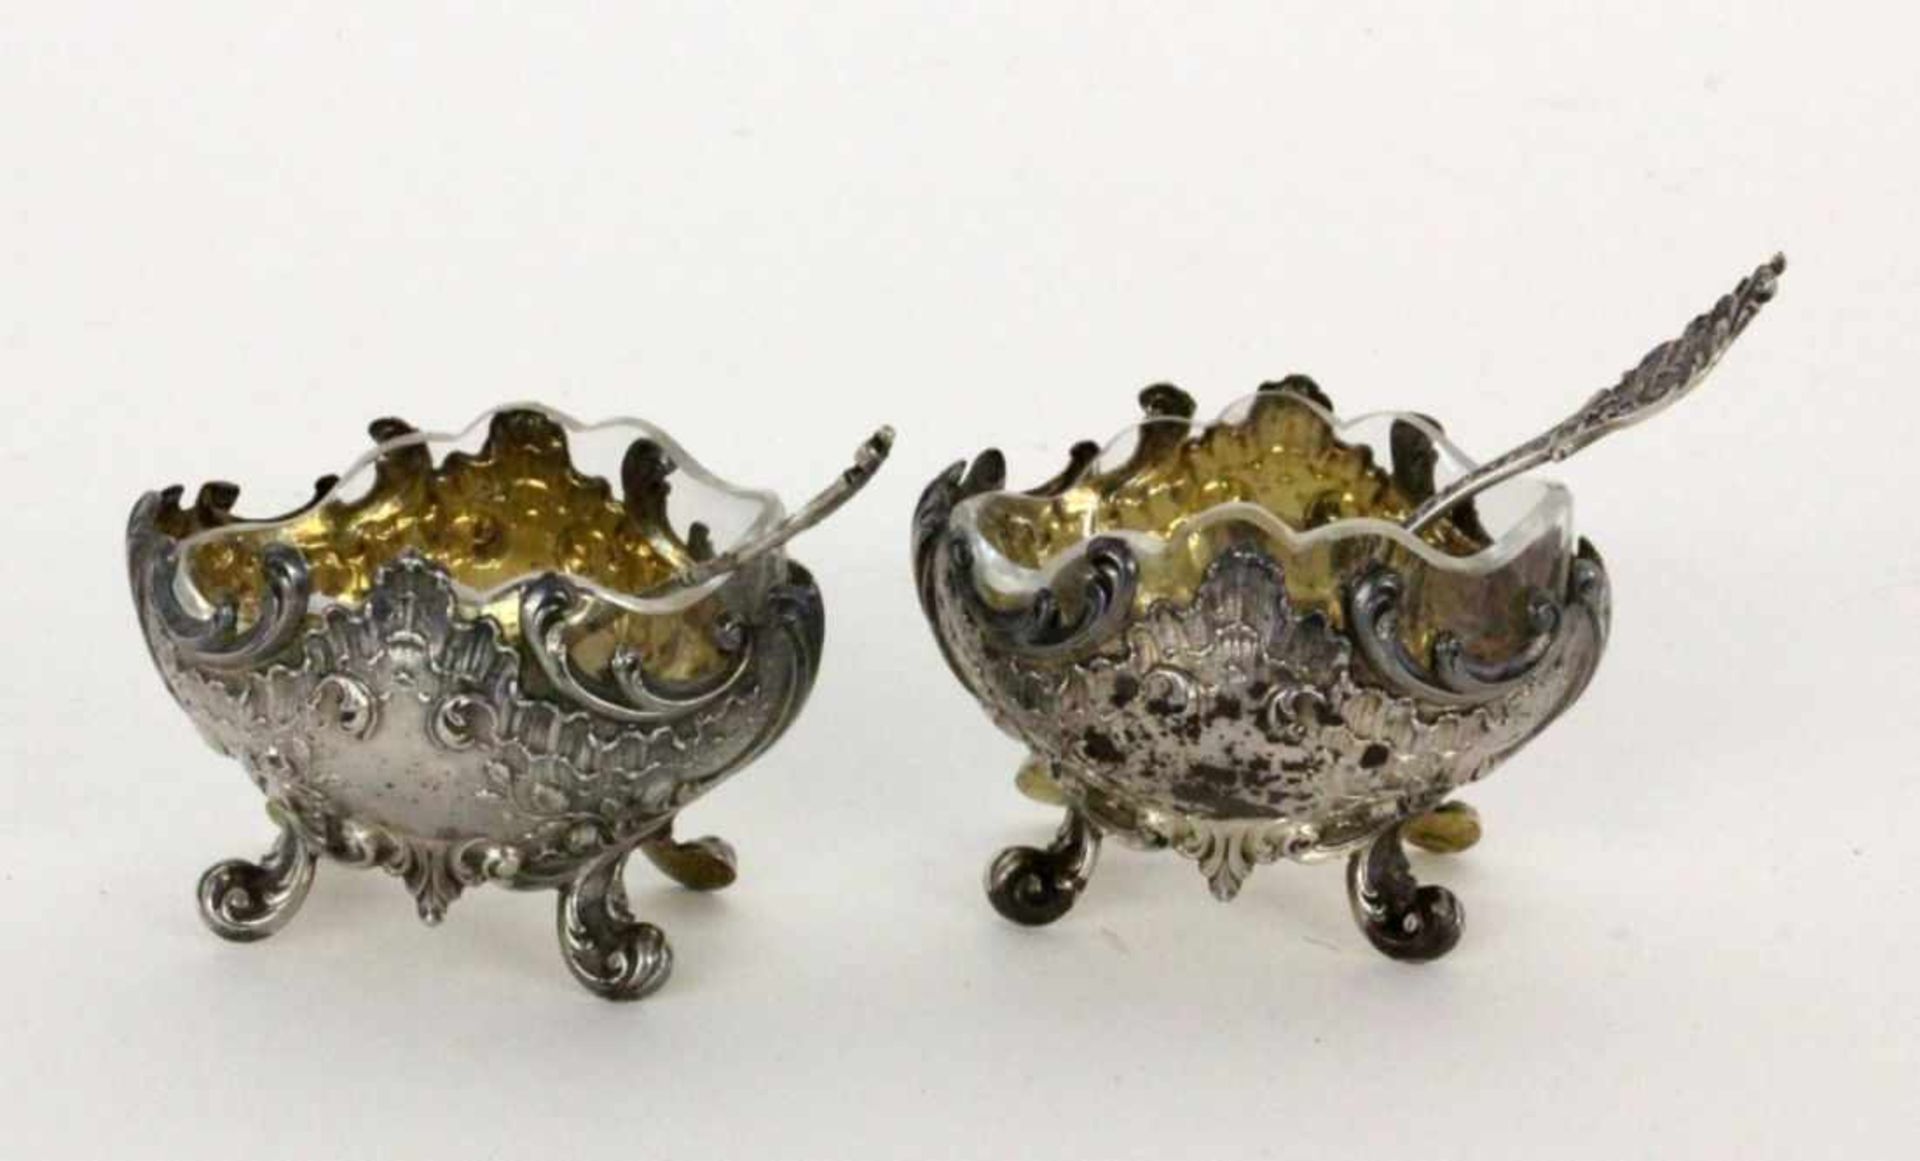 A PAIR OF SALT BOWLS France, 19th century Baroque style. Silver with gilt interior,original glass